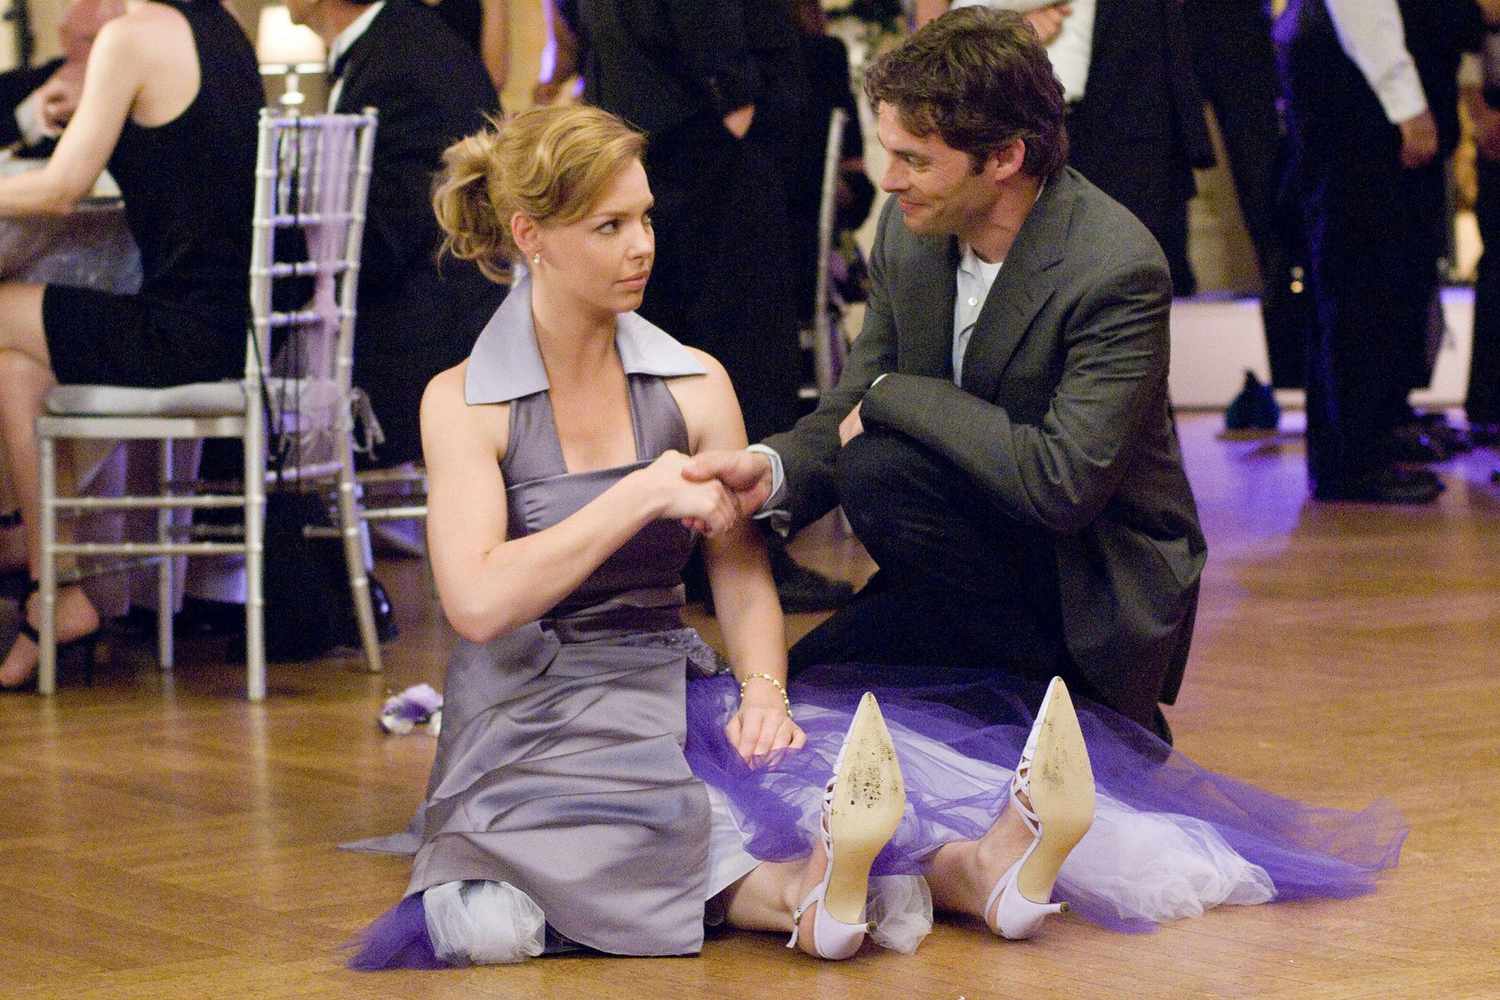 ’27 Dresses’ writer is not sure Jane and Kevin would be married today